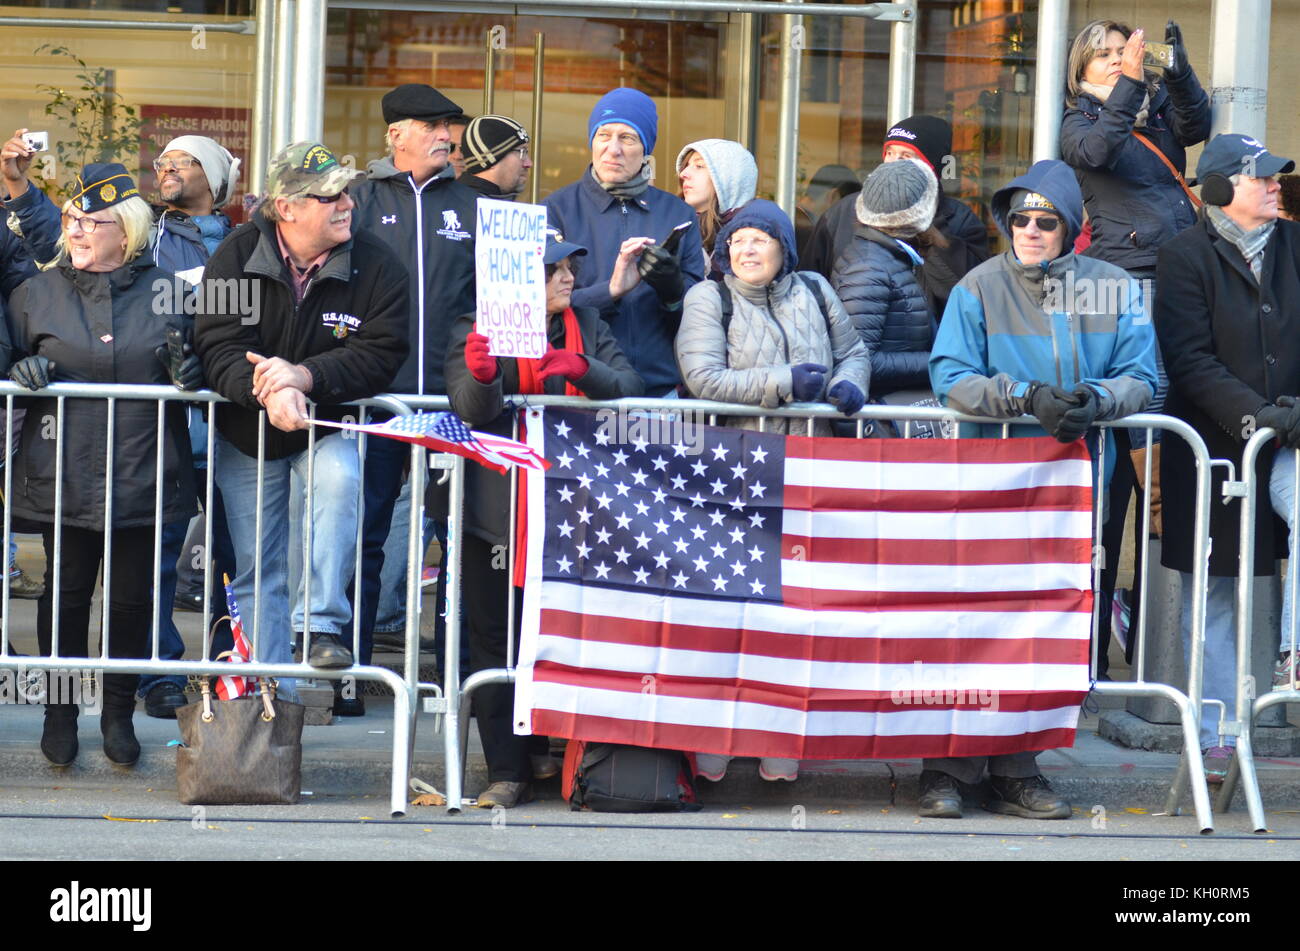 New York City, USA. 11th Nov, 2017. Veterans Day Parade on 5th Avenue in New York City. The largest Veterans Day event in the nation featuring tens of thousands of marchers, including more than 300 units. Credit: Ryan Rahman/Alamy Live News Stock Photo